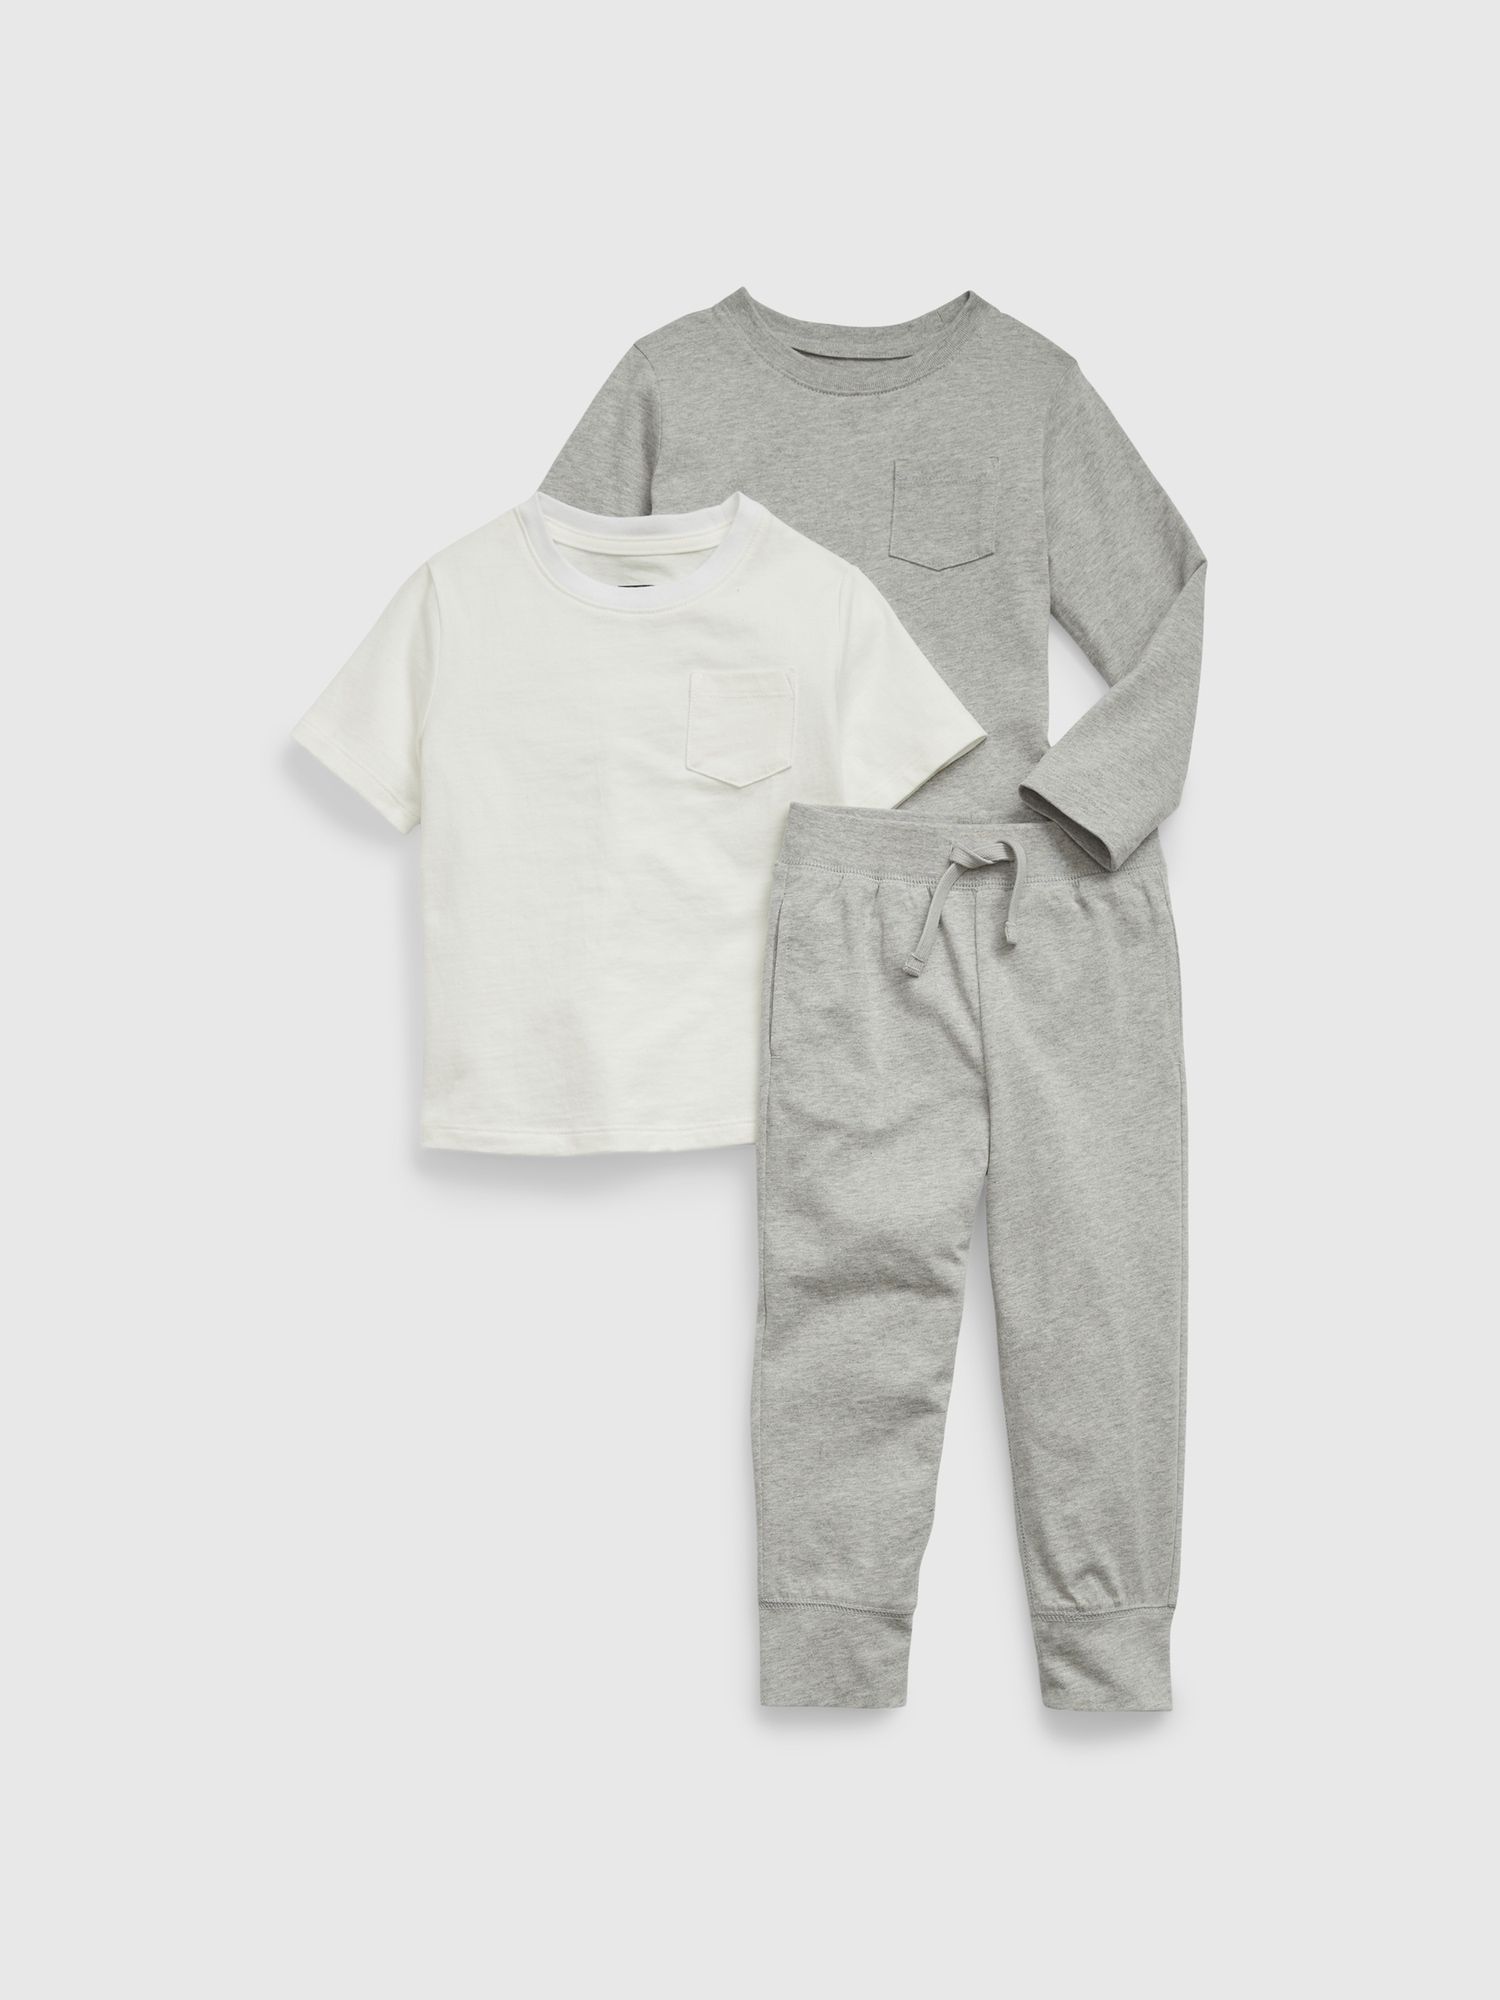 Toddler Mix and Match Outfit Set